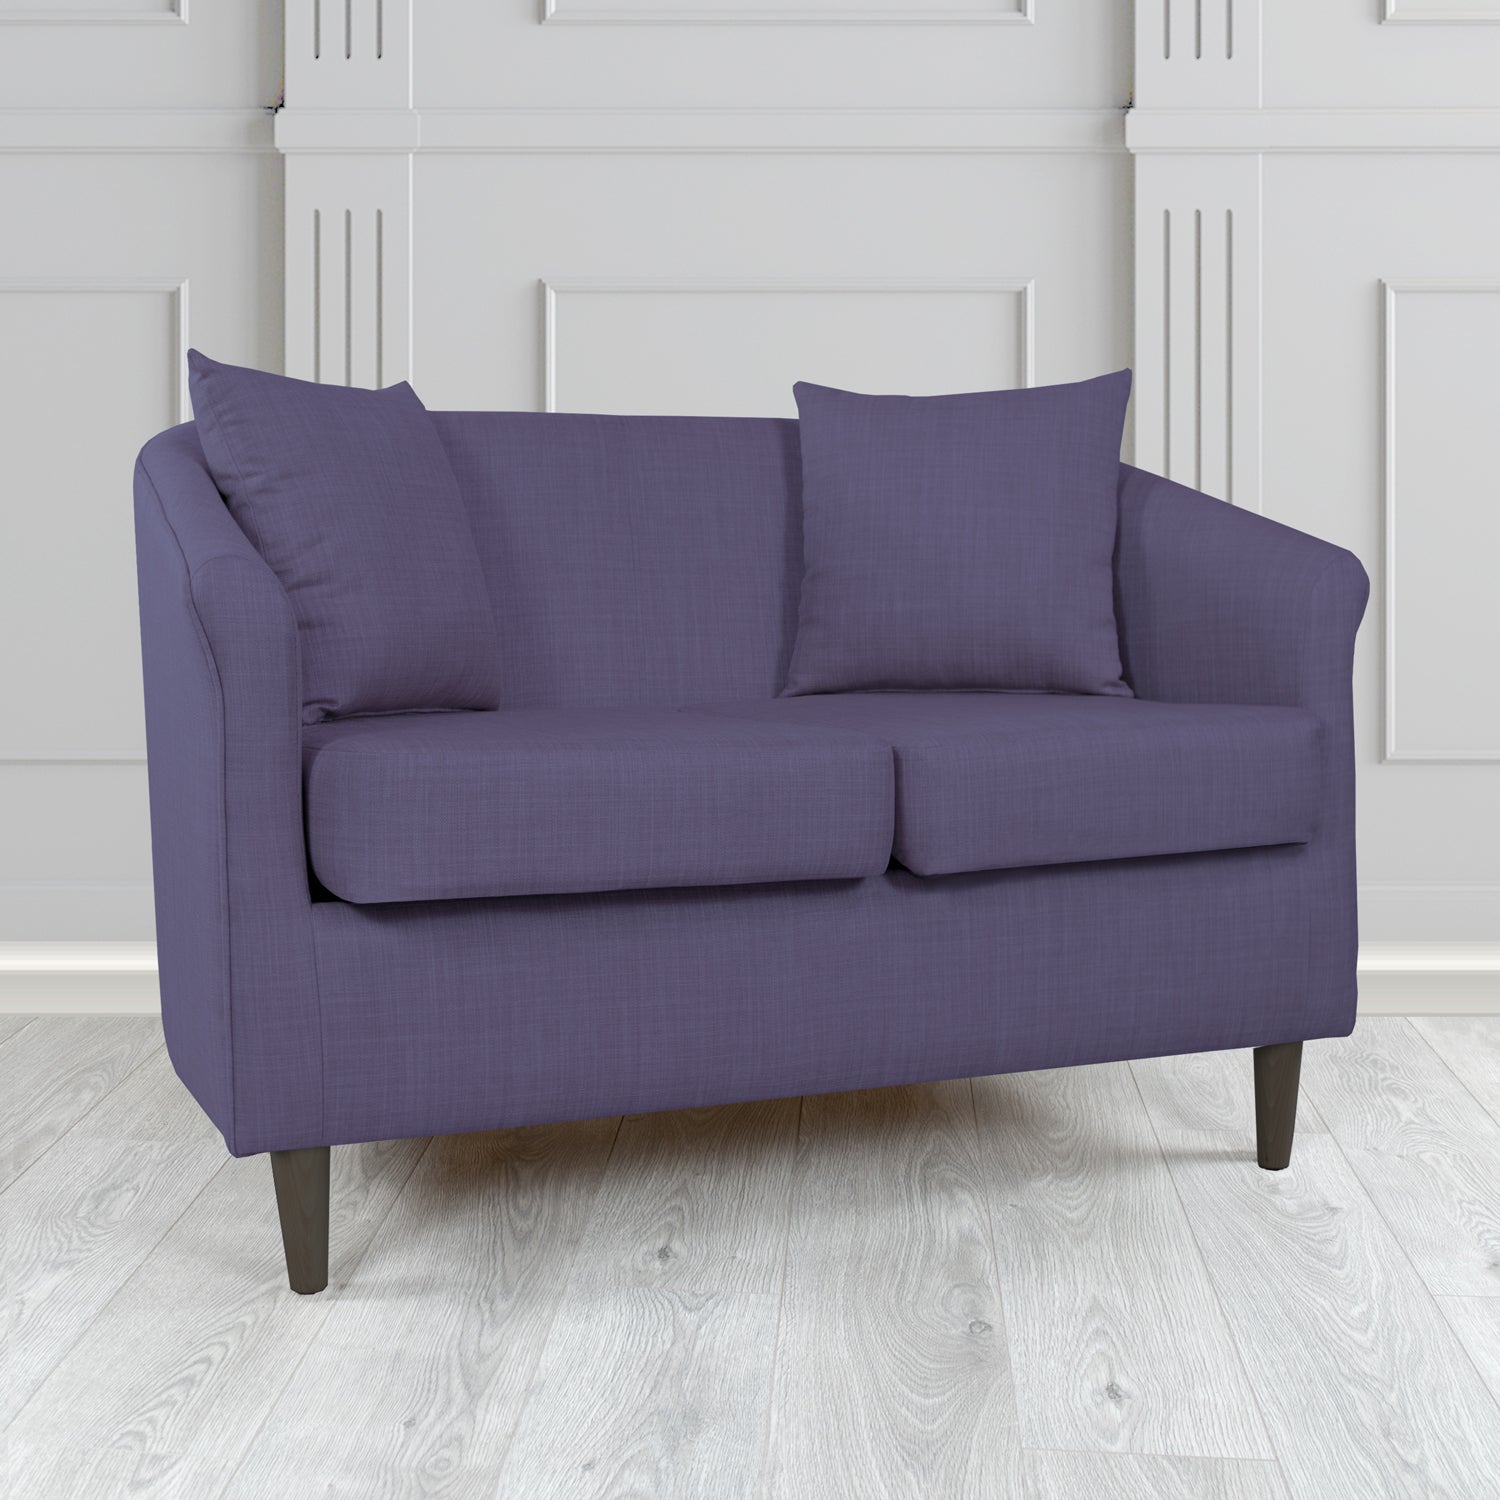 St Tropez Charles Purple Plain Linen Fabric 2 Seater Tub Sofa with Scatter Cushions - The Tub Chair Shop